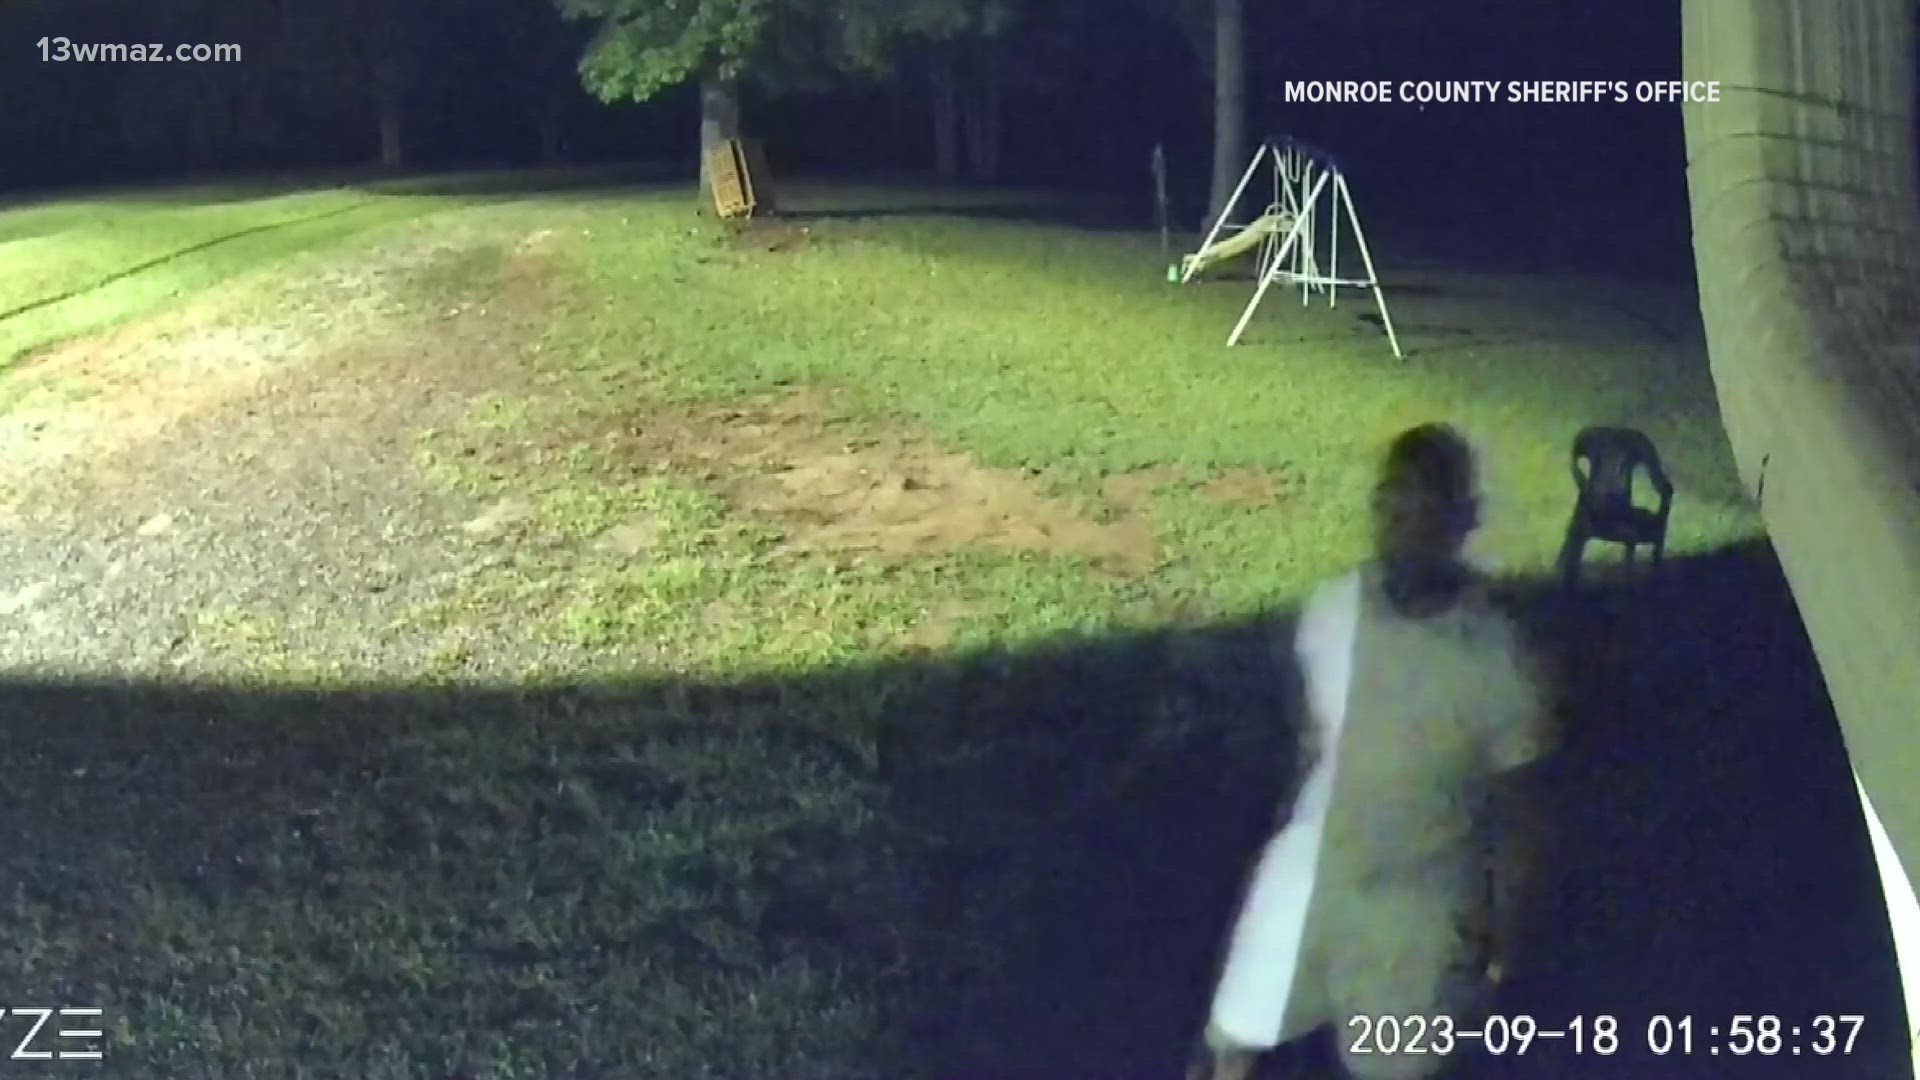 They say it happened at around 1:55 a.m. on Sept. 18. The suspects — one in a camouflage hoodie, the other in a white shirt — were caught on video.